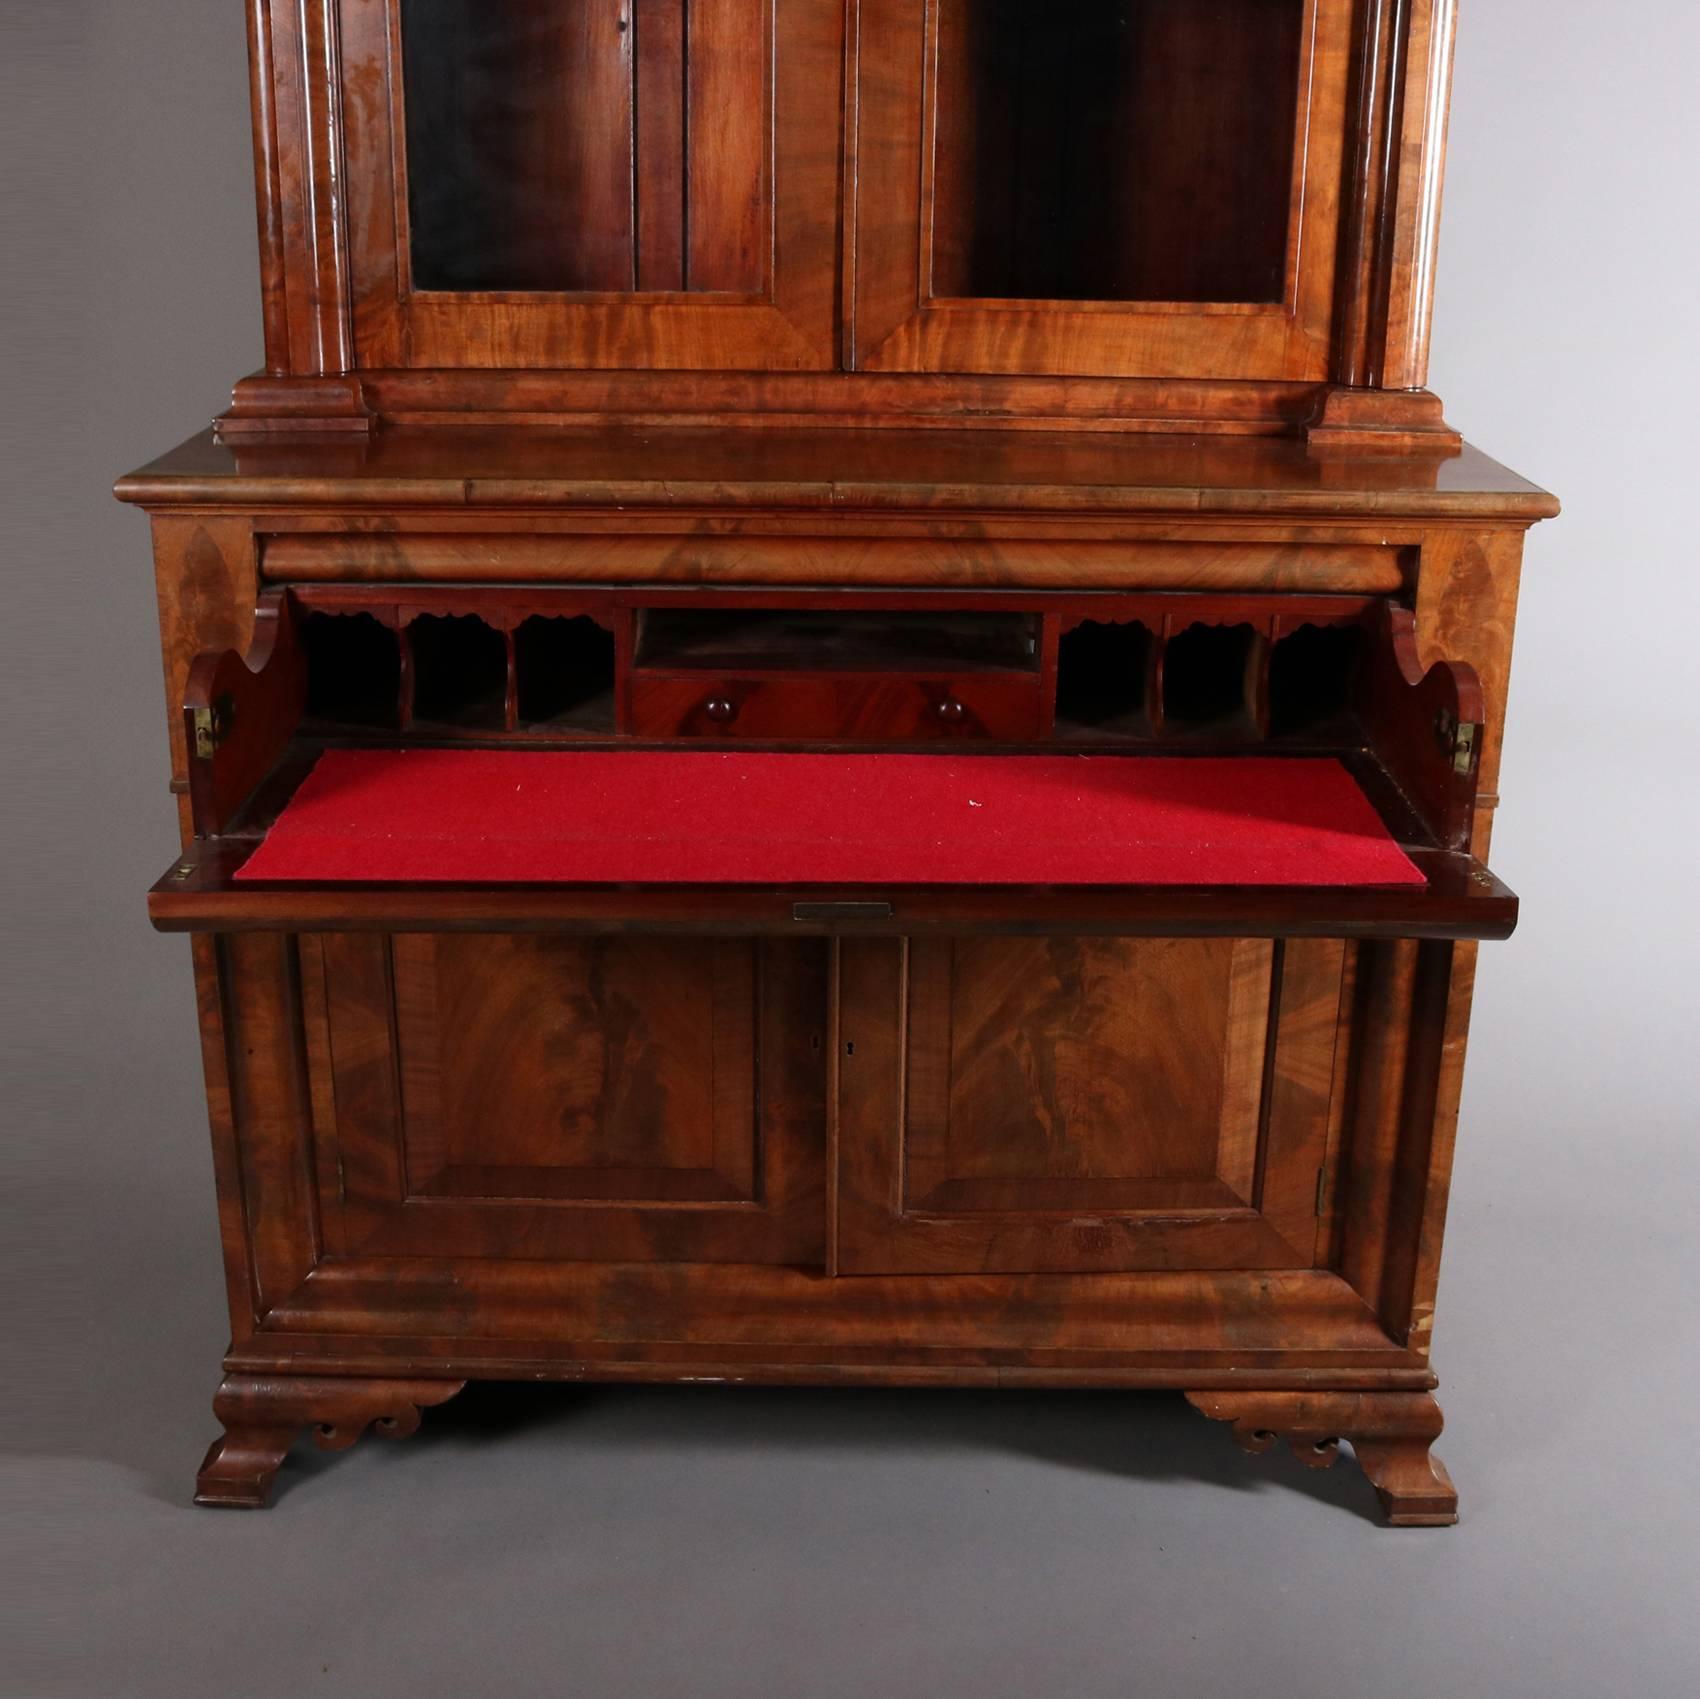 Antique Philadelphia American Empire flame mahogany secretary features upper glass front bookcase with pierced stylized floral corner pieces, drop front opens to reveal felt lined writing surface and interior storage pigeon holes and drawer, lower